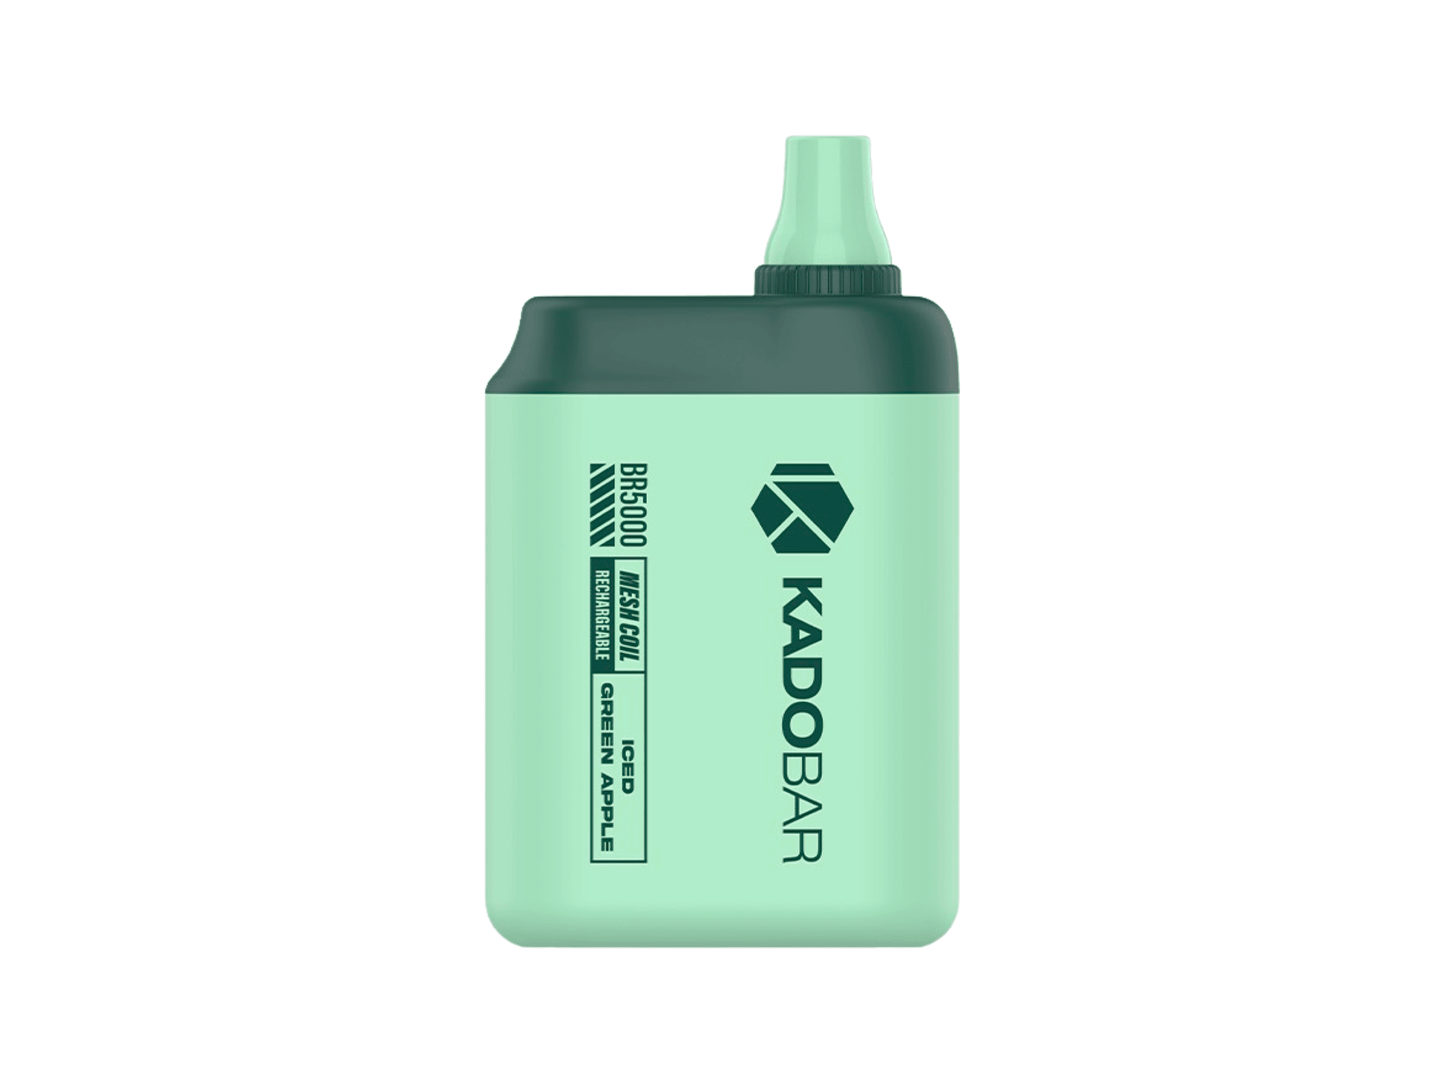 Kadobar br5000 Iced Green Apple flavored disposable vape device.